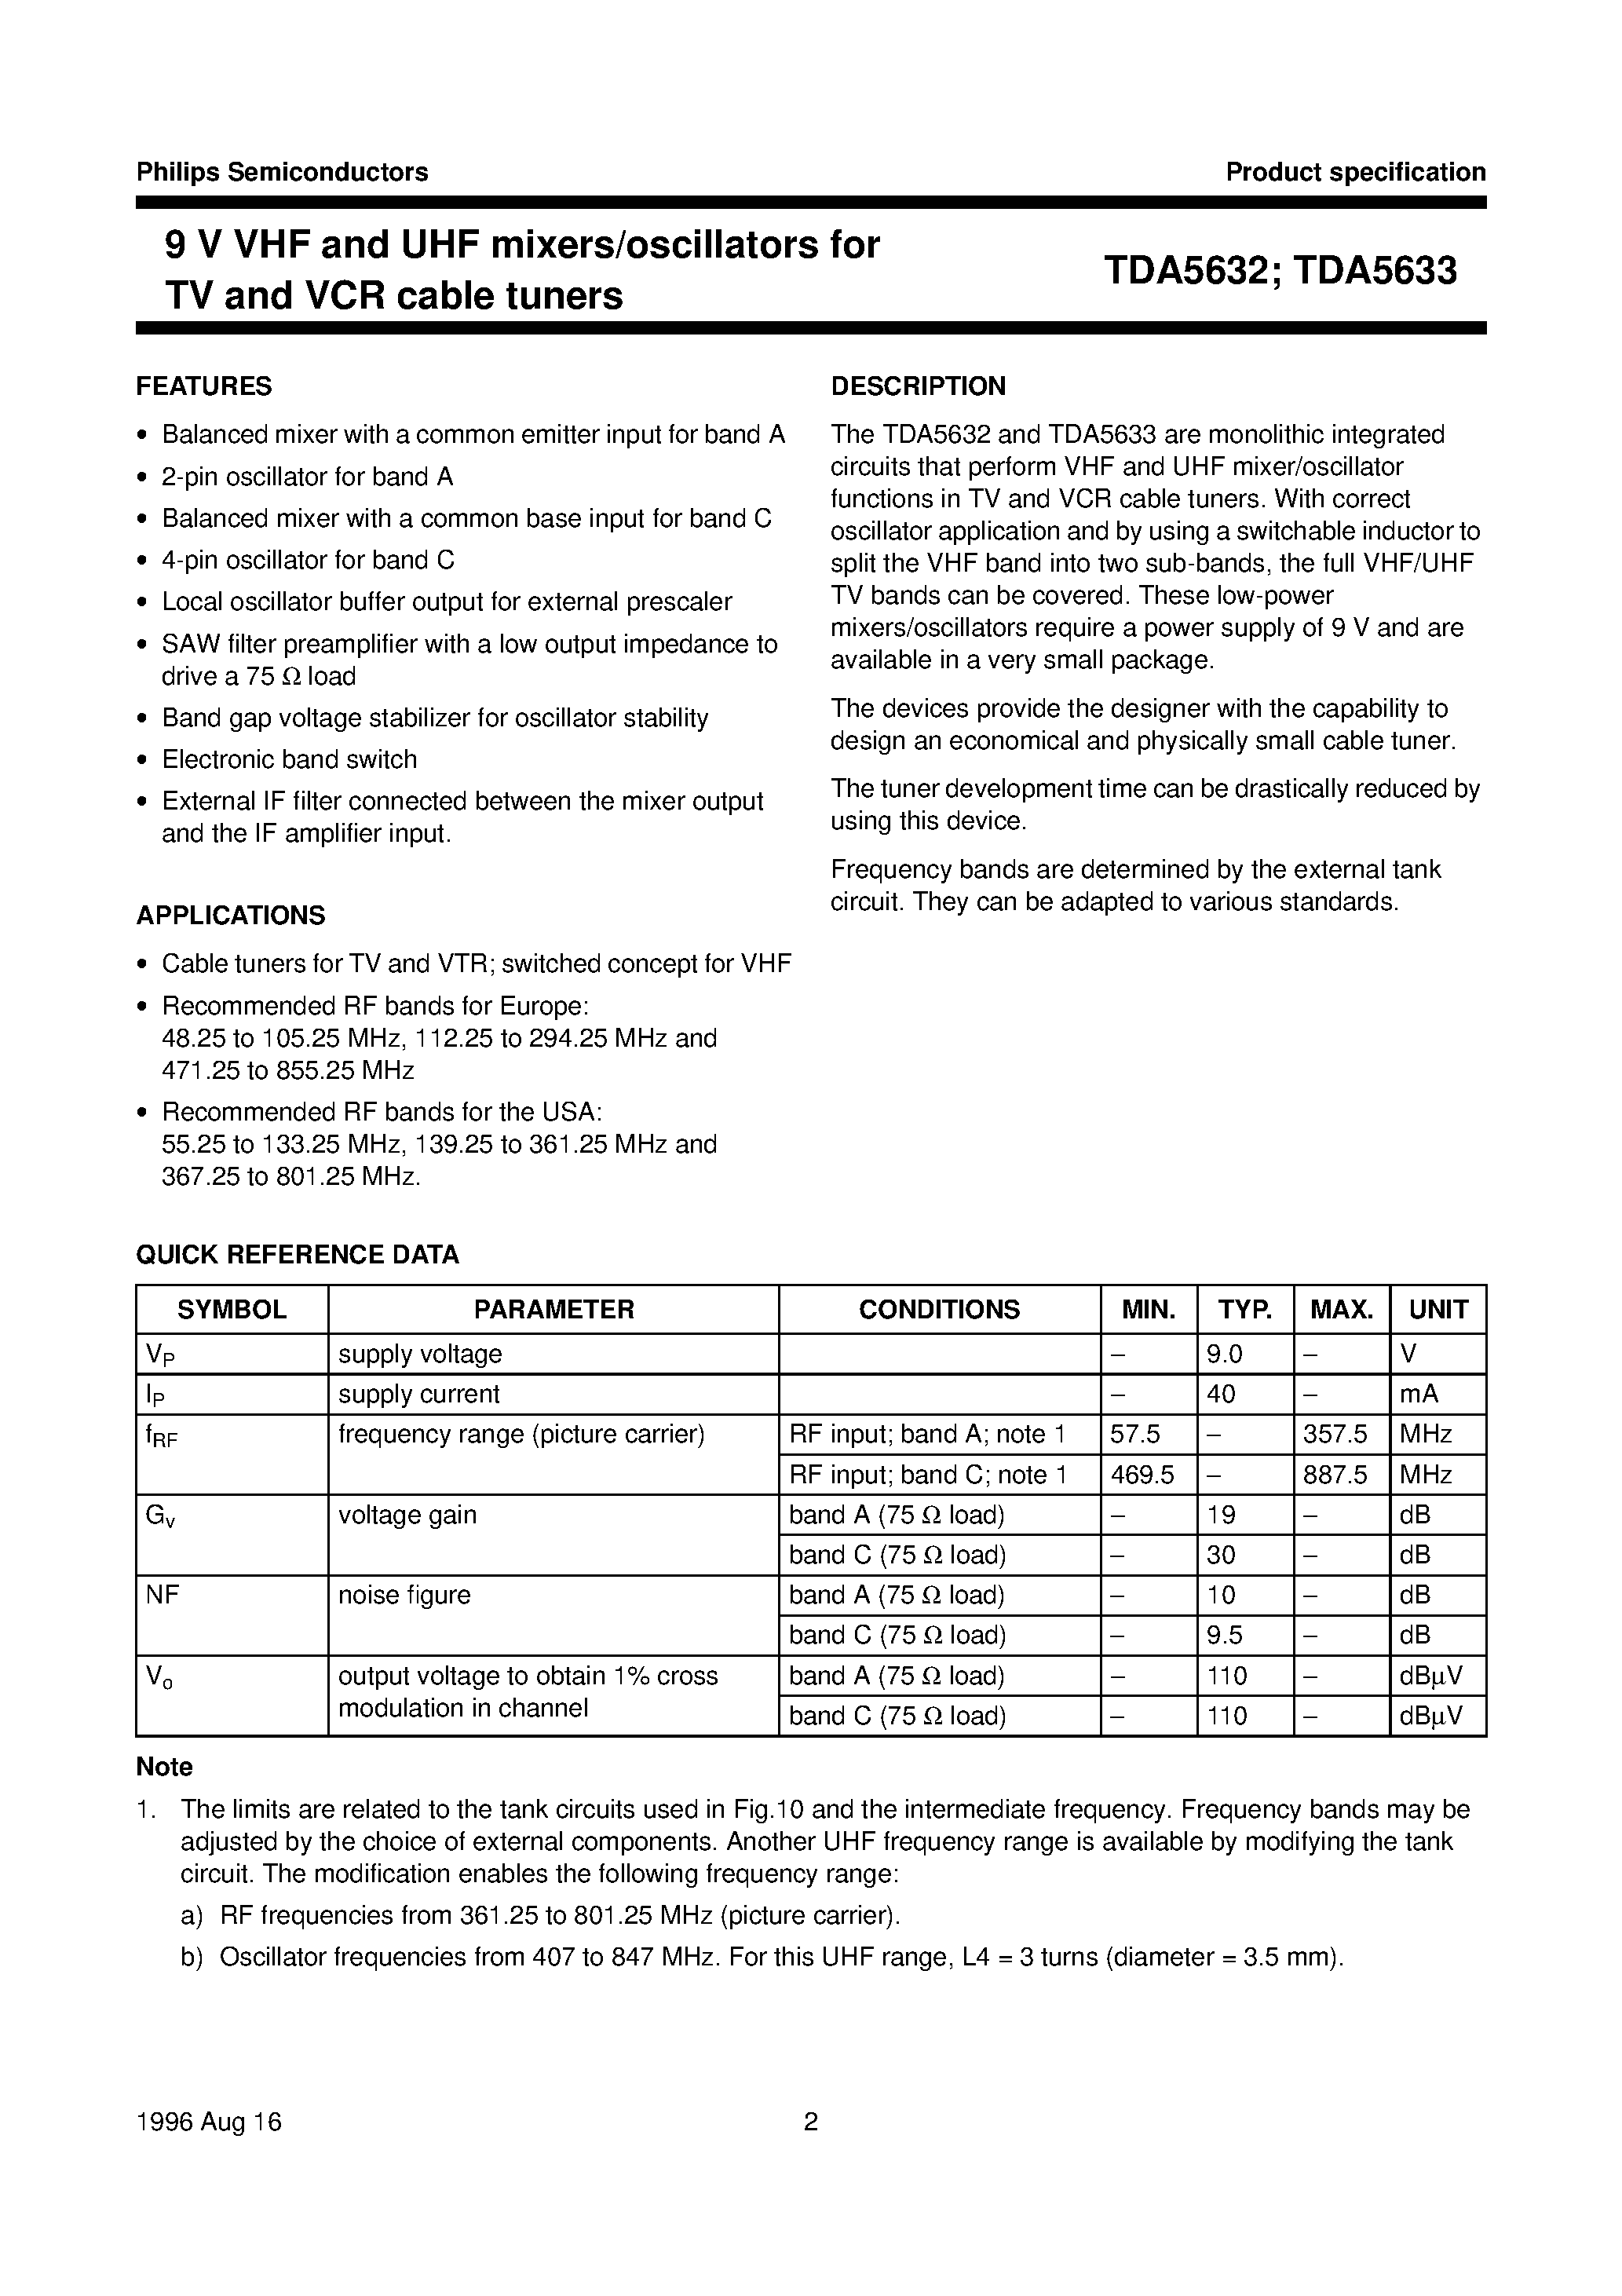 Datasheet TDA5632 - 9 V VHF and UHF mixers/oscillators for TV and VCR cable tuners page 2